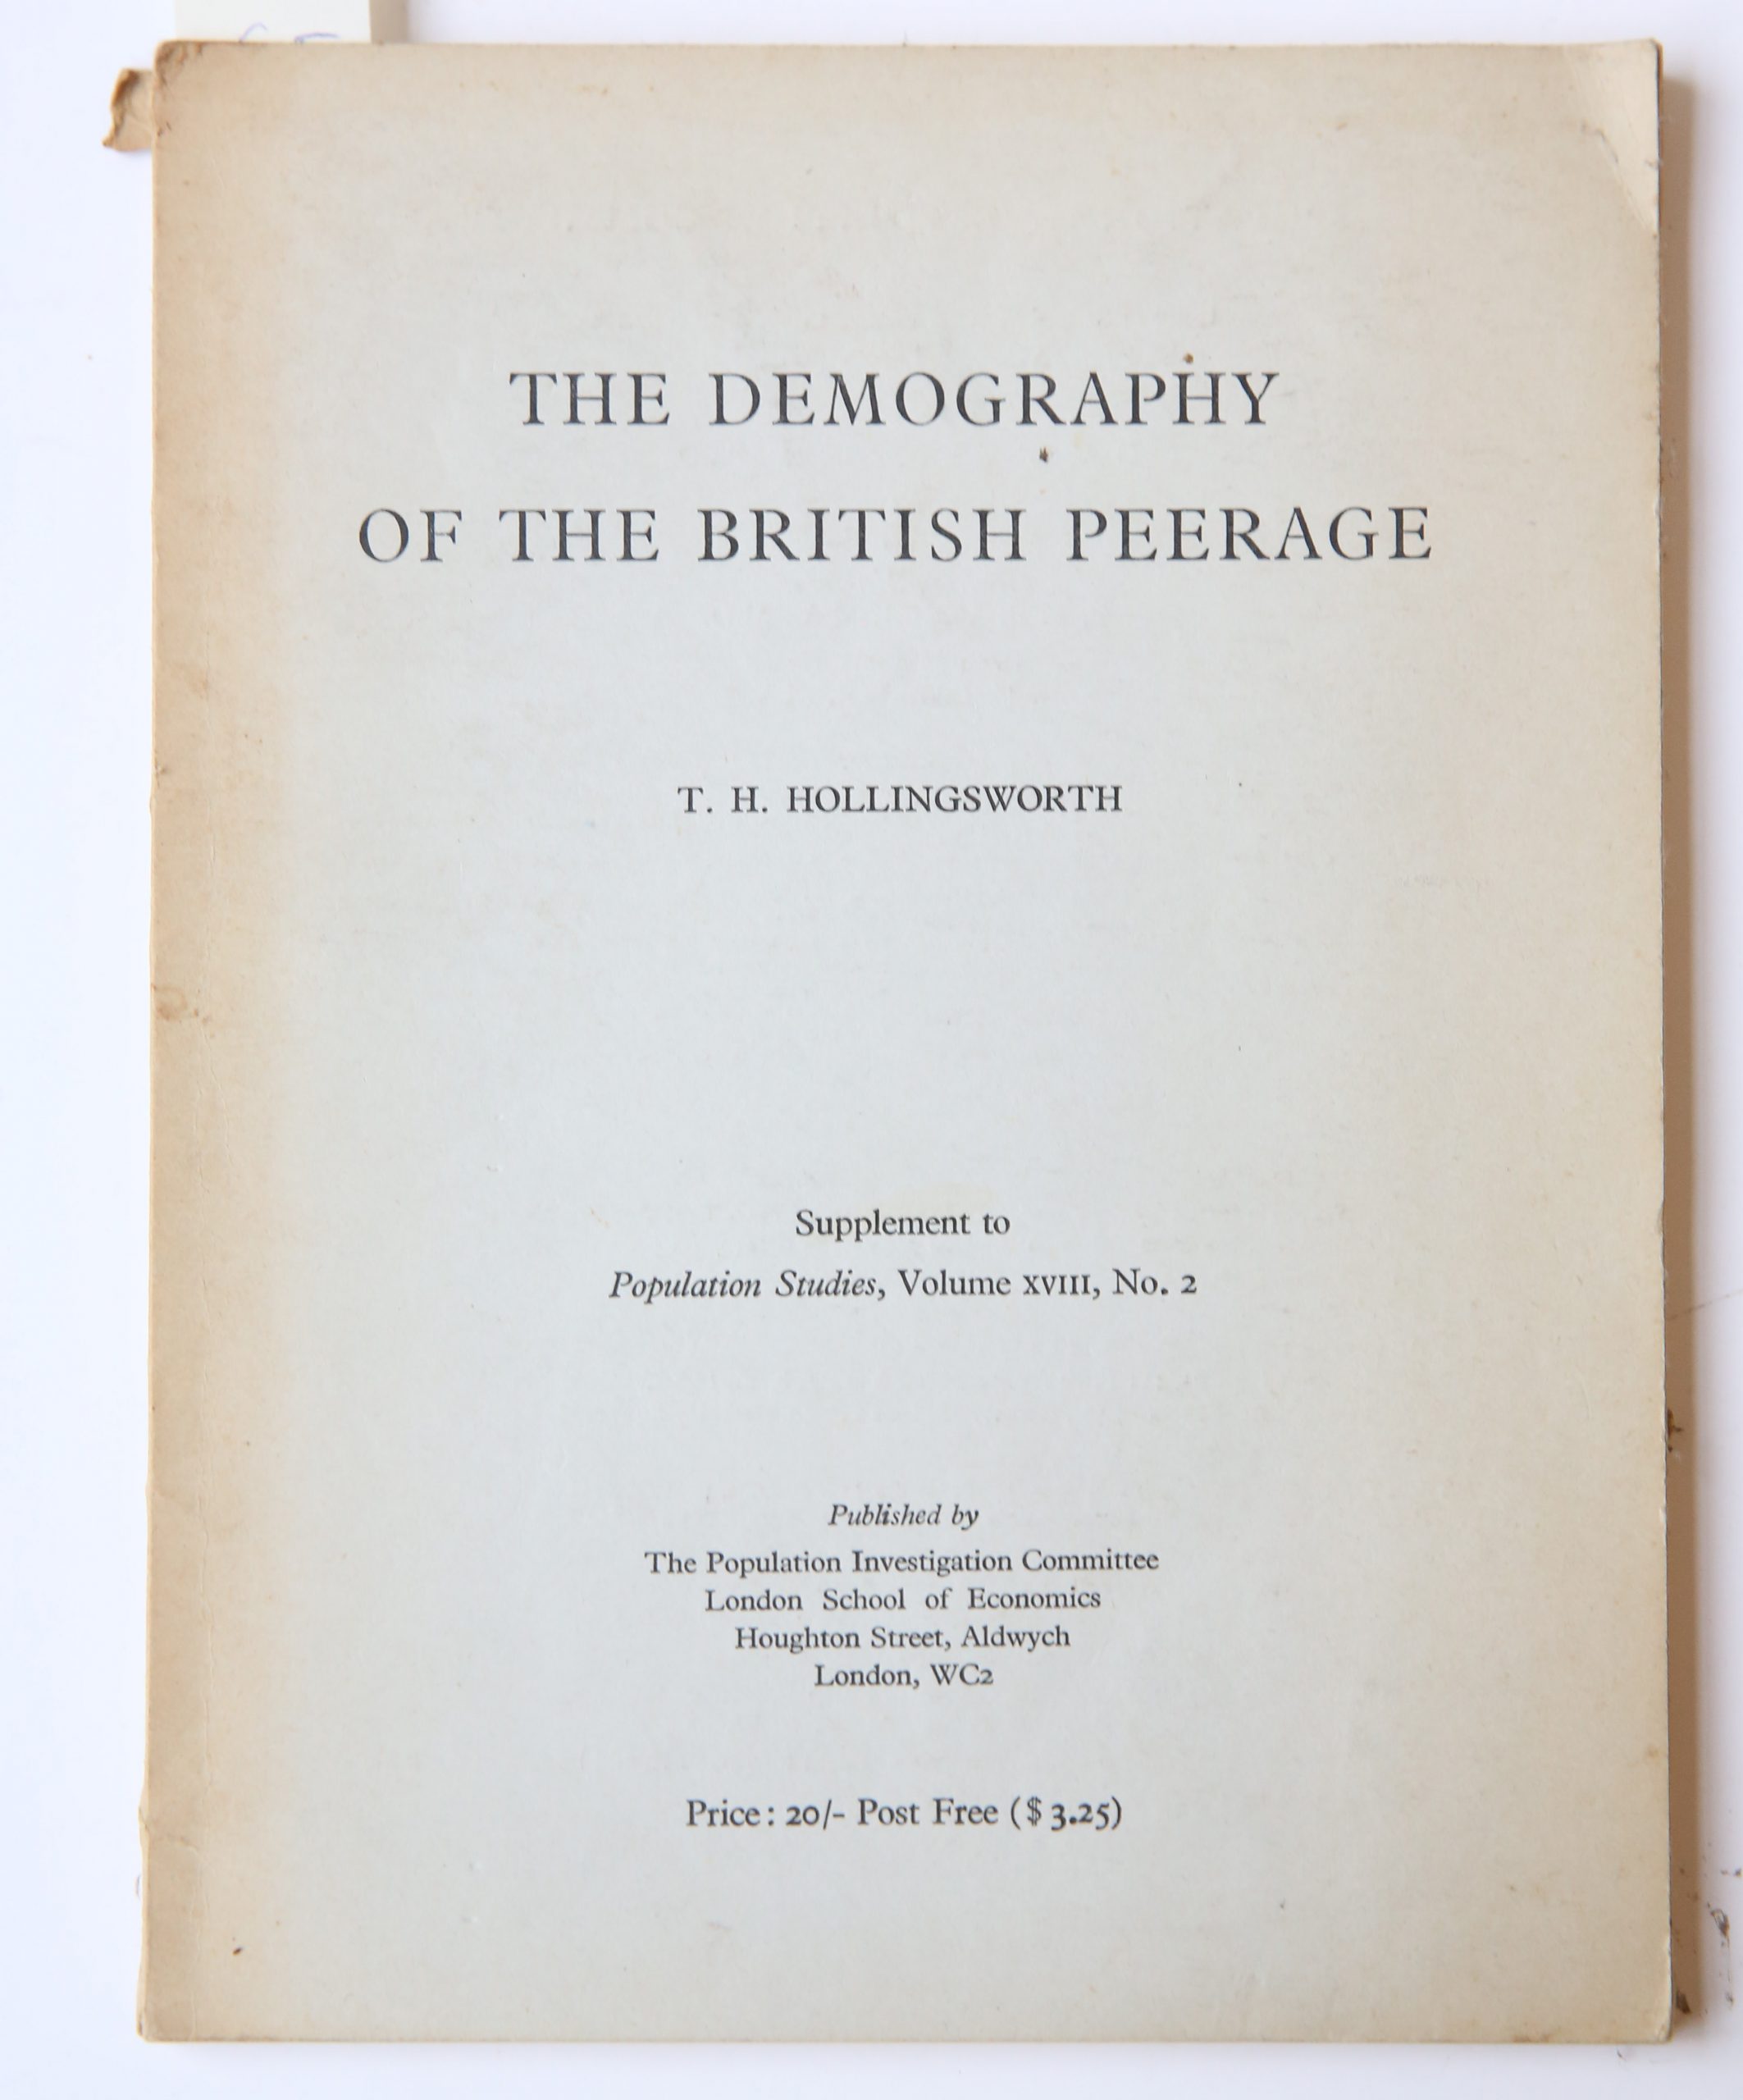 The demography of the British peerage. (=Supplement to: Population studies, vol. 18, no. 2), Published by Population Investigation Committee, London School of Economics [1965], 108 pp.